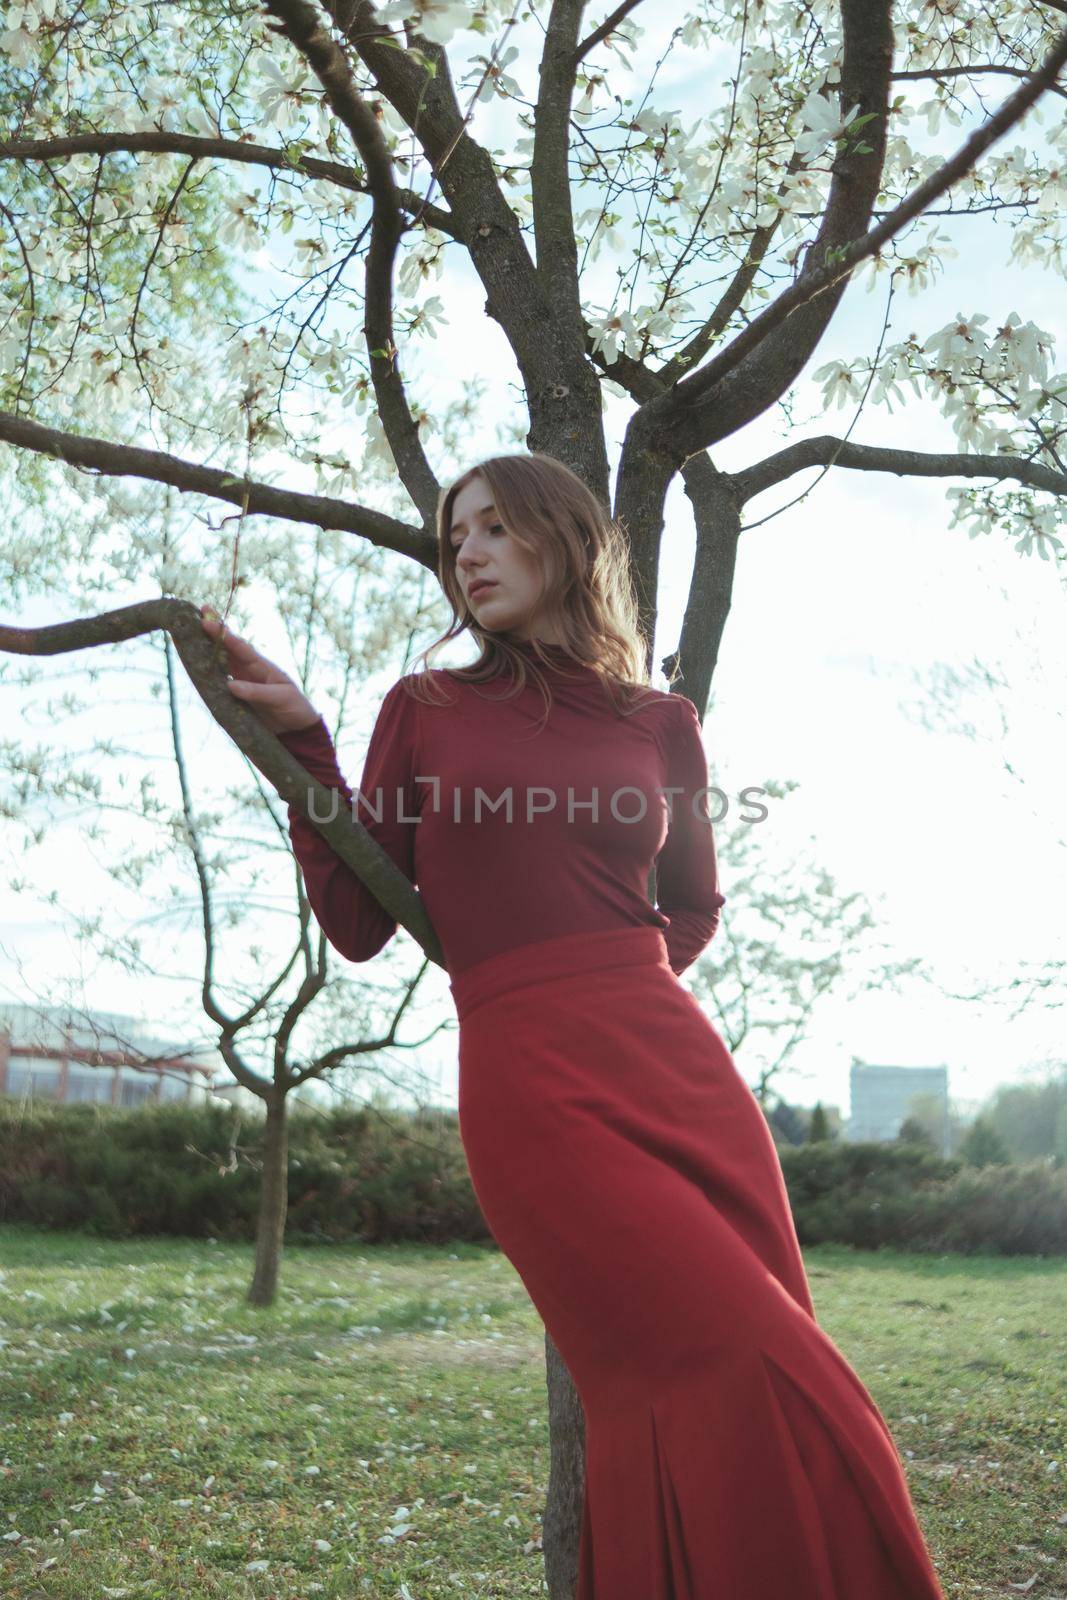 A blonde girl in red leans on a tree in the park. the concept of unity with nature